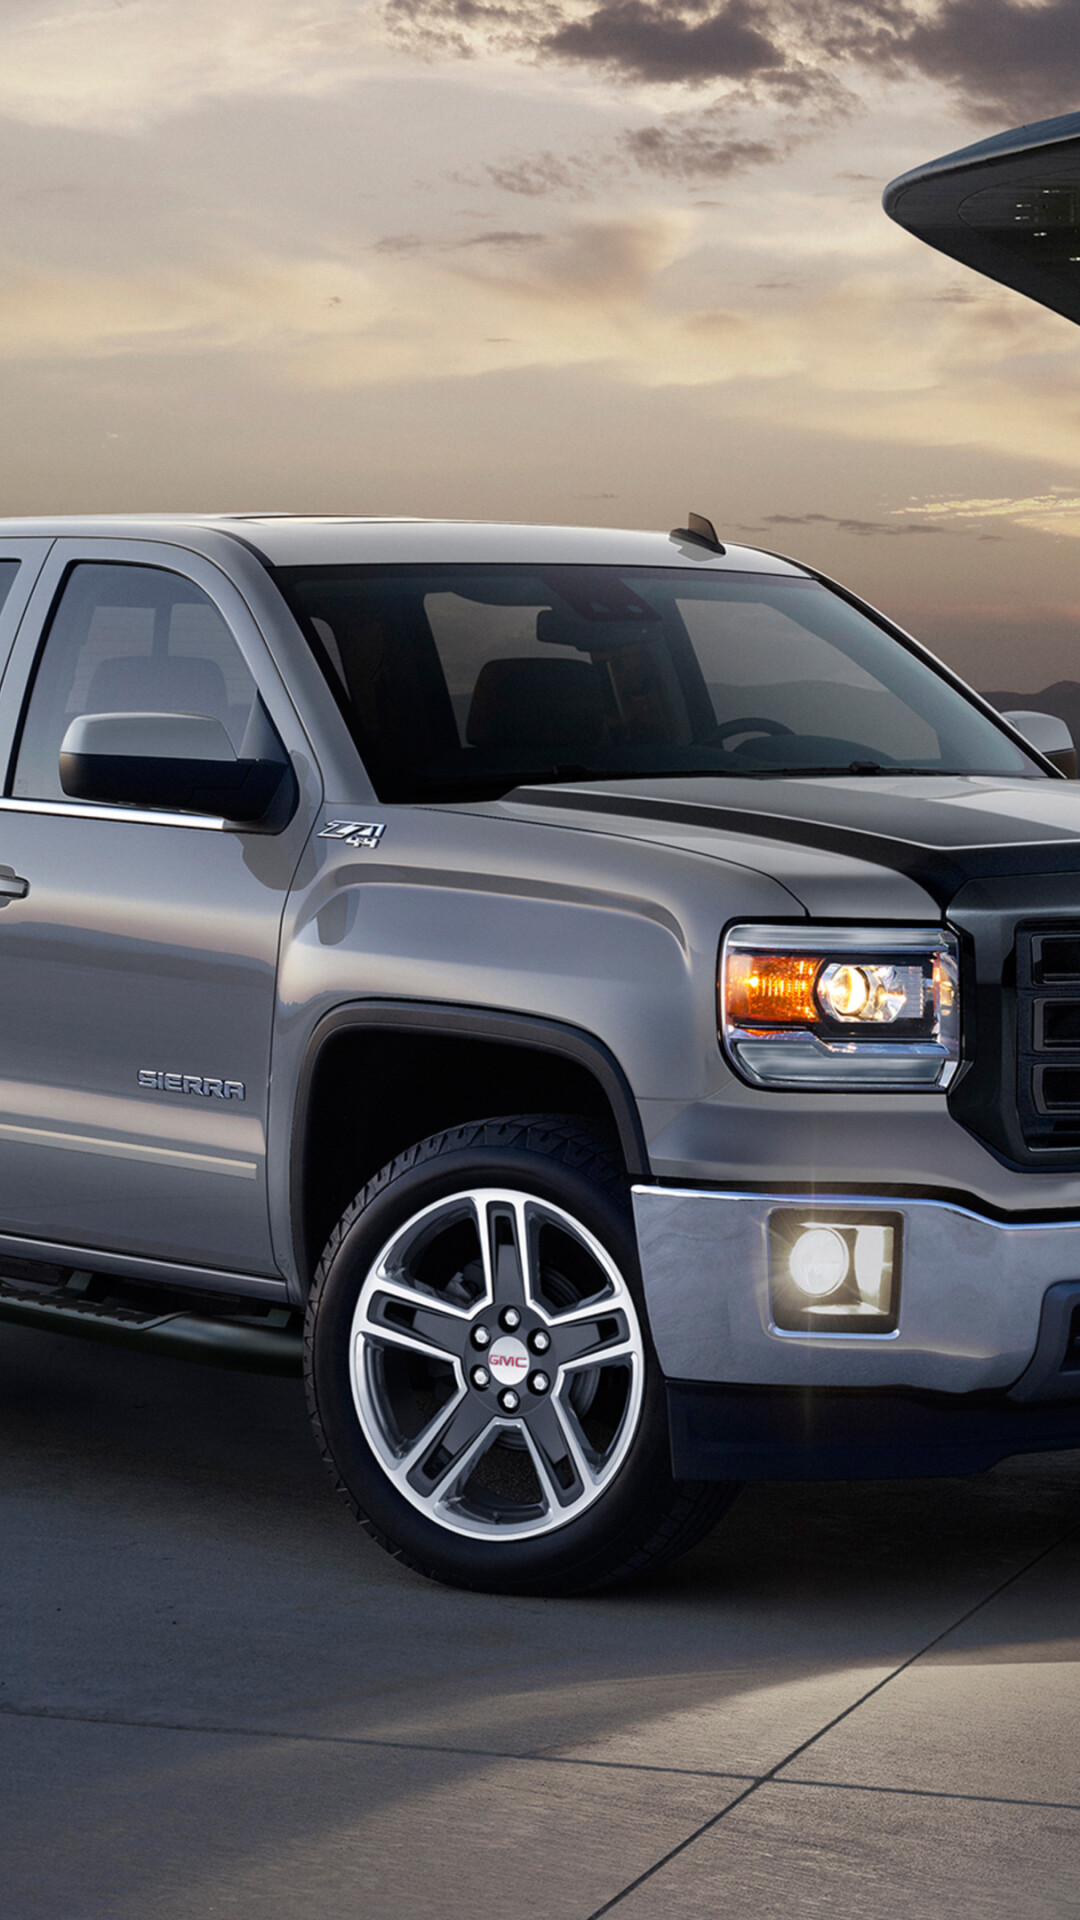 GMC Sierra: 1500 SLE Double Cab Carbon Edition, Designed for serious off-road action, 2015 model. 1080x1920 Full HD Wallpaper.